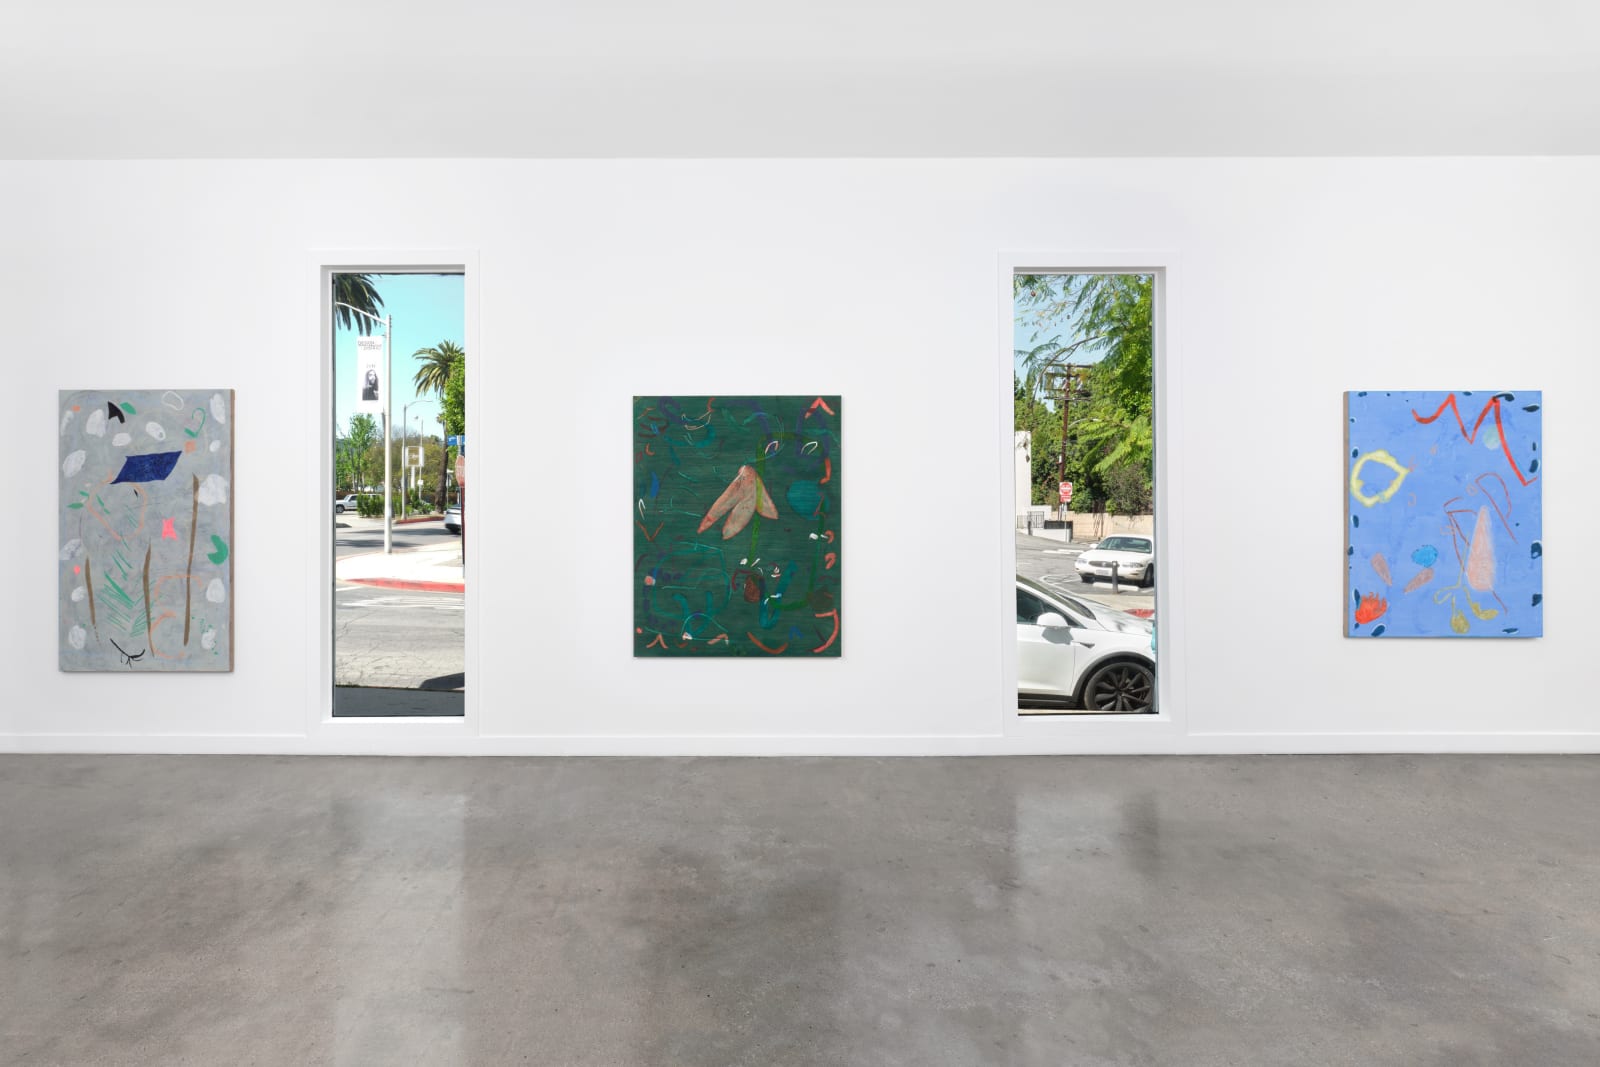 Installation view of Clare Grill: Oyster, May 21 - June 30, 2022